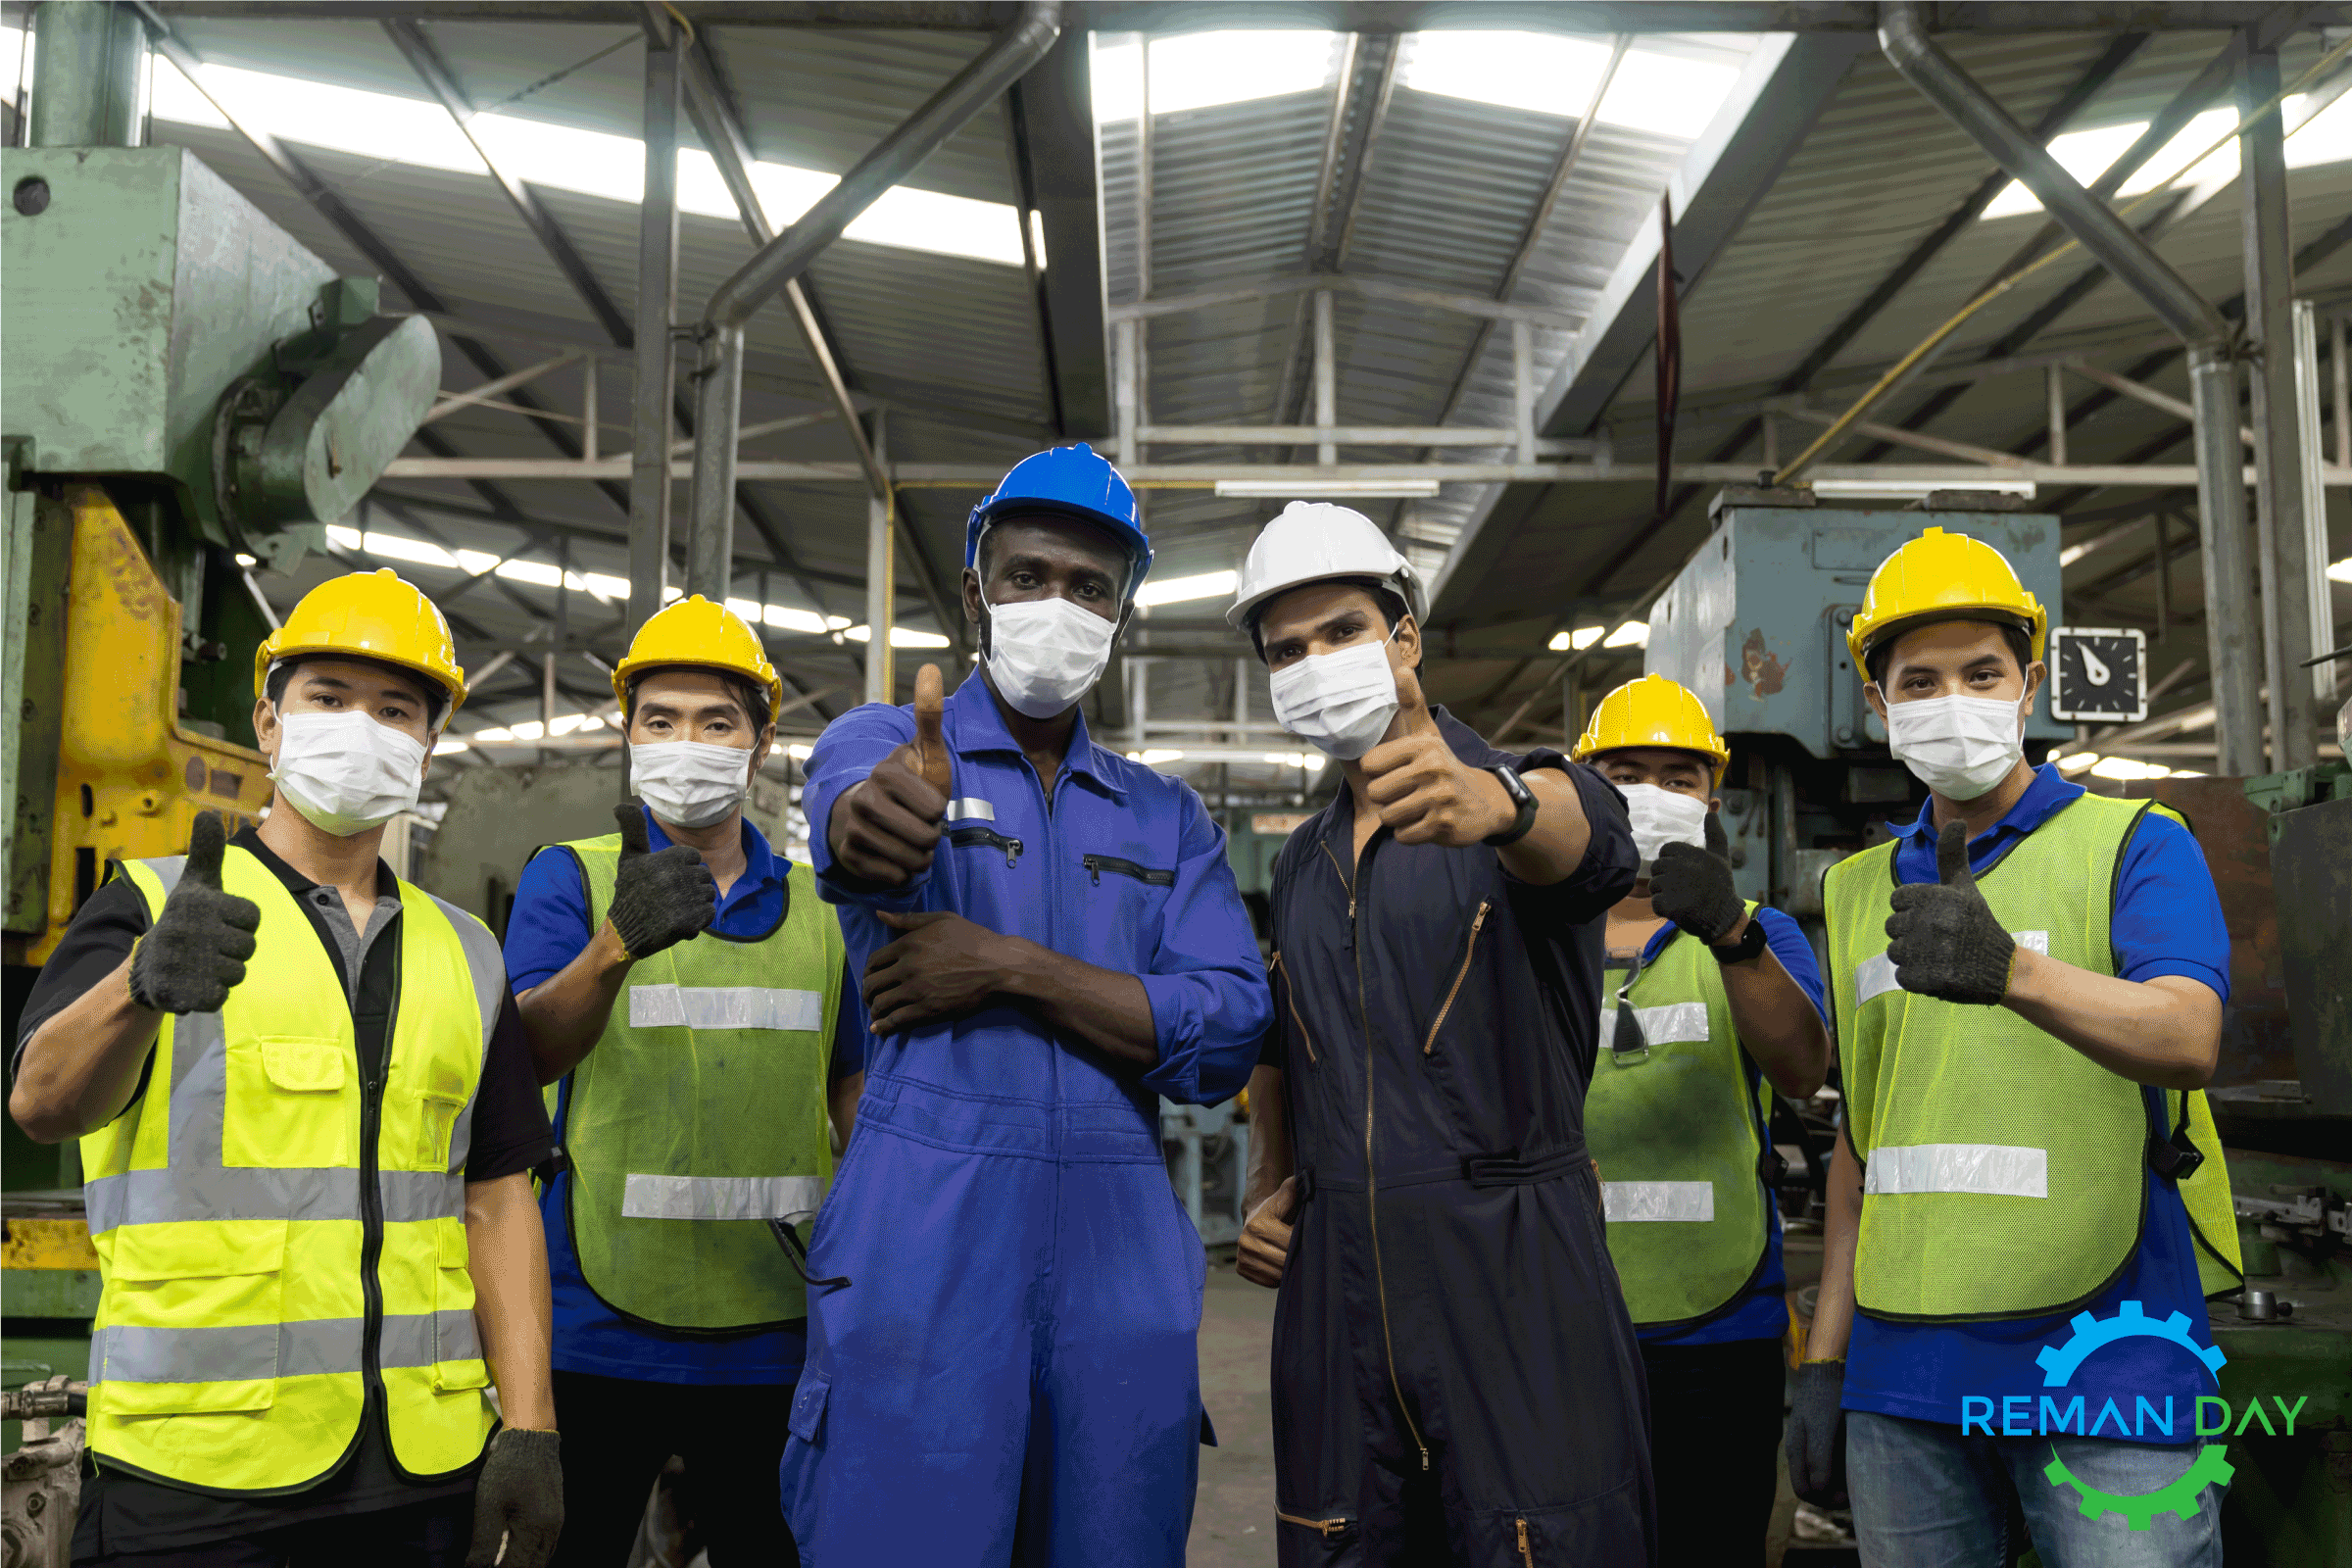 Image of industrial workers with their thumbs up, with the Reman Day logo